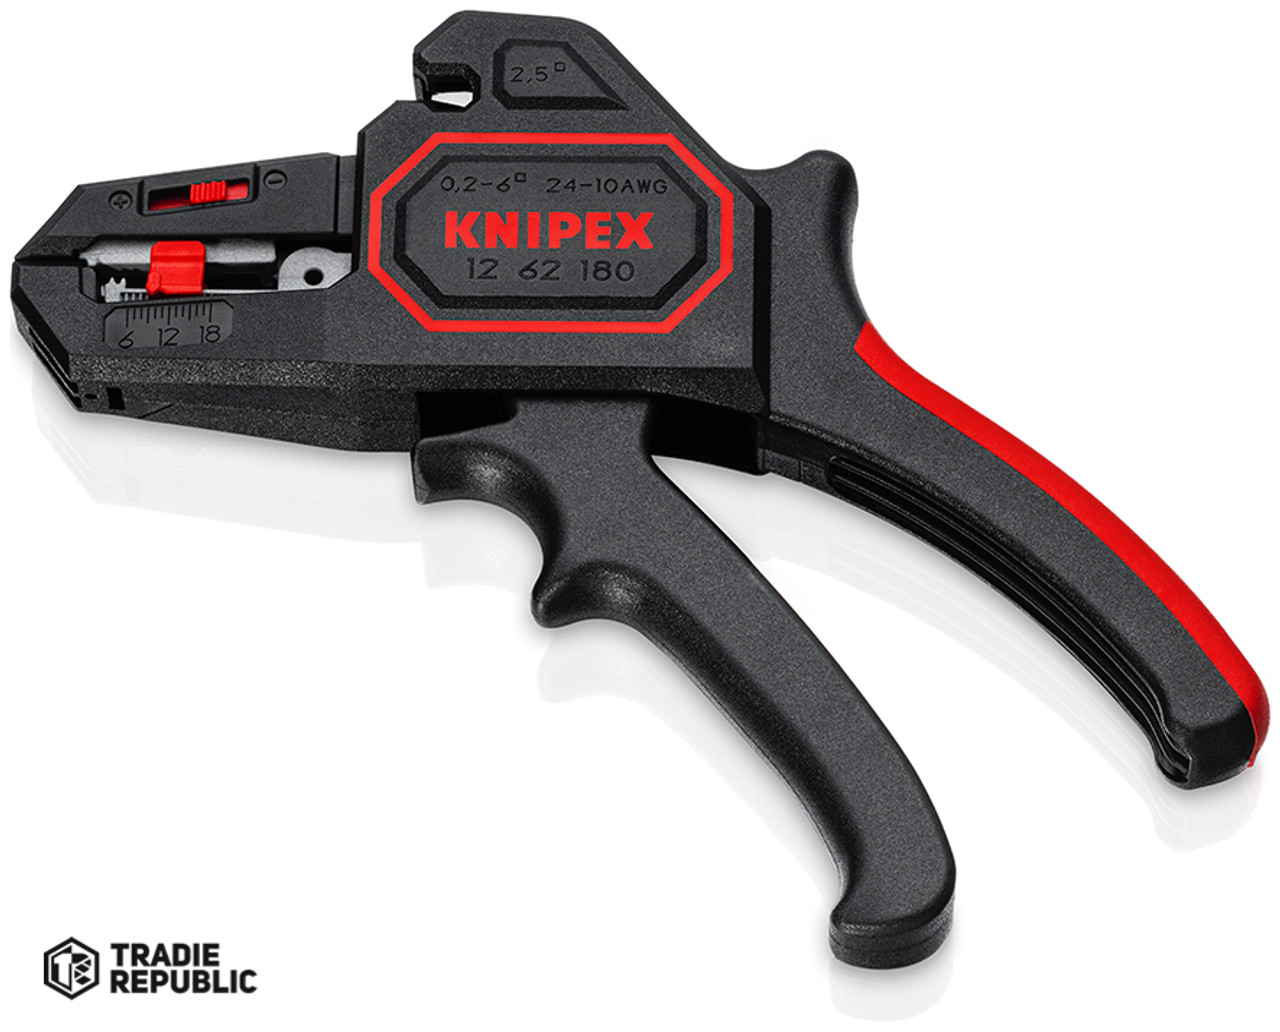 1262180 Knipex Automatic Insulation Stripper 180mm